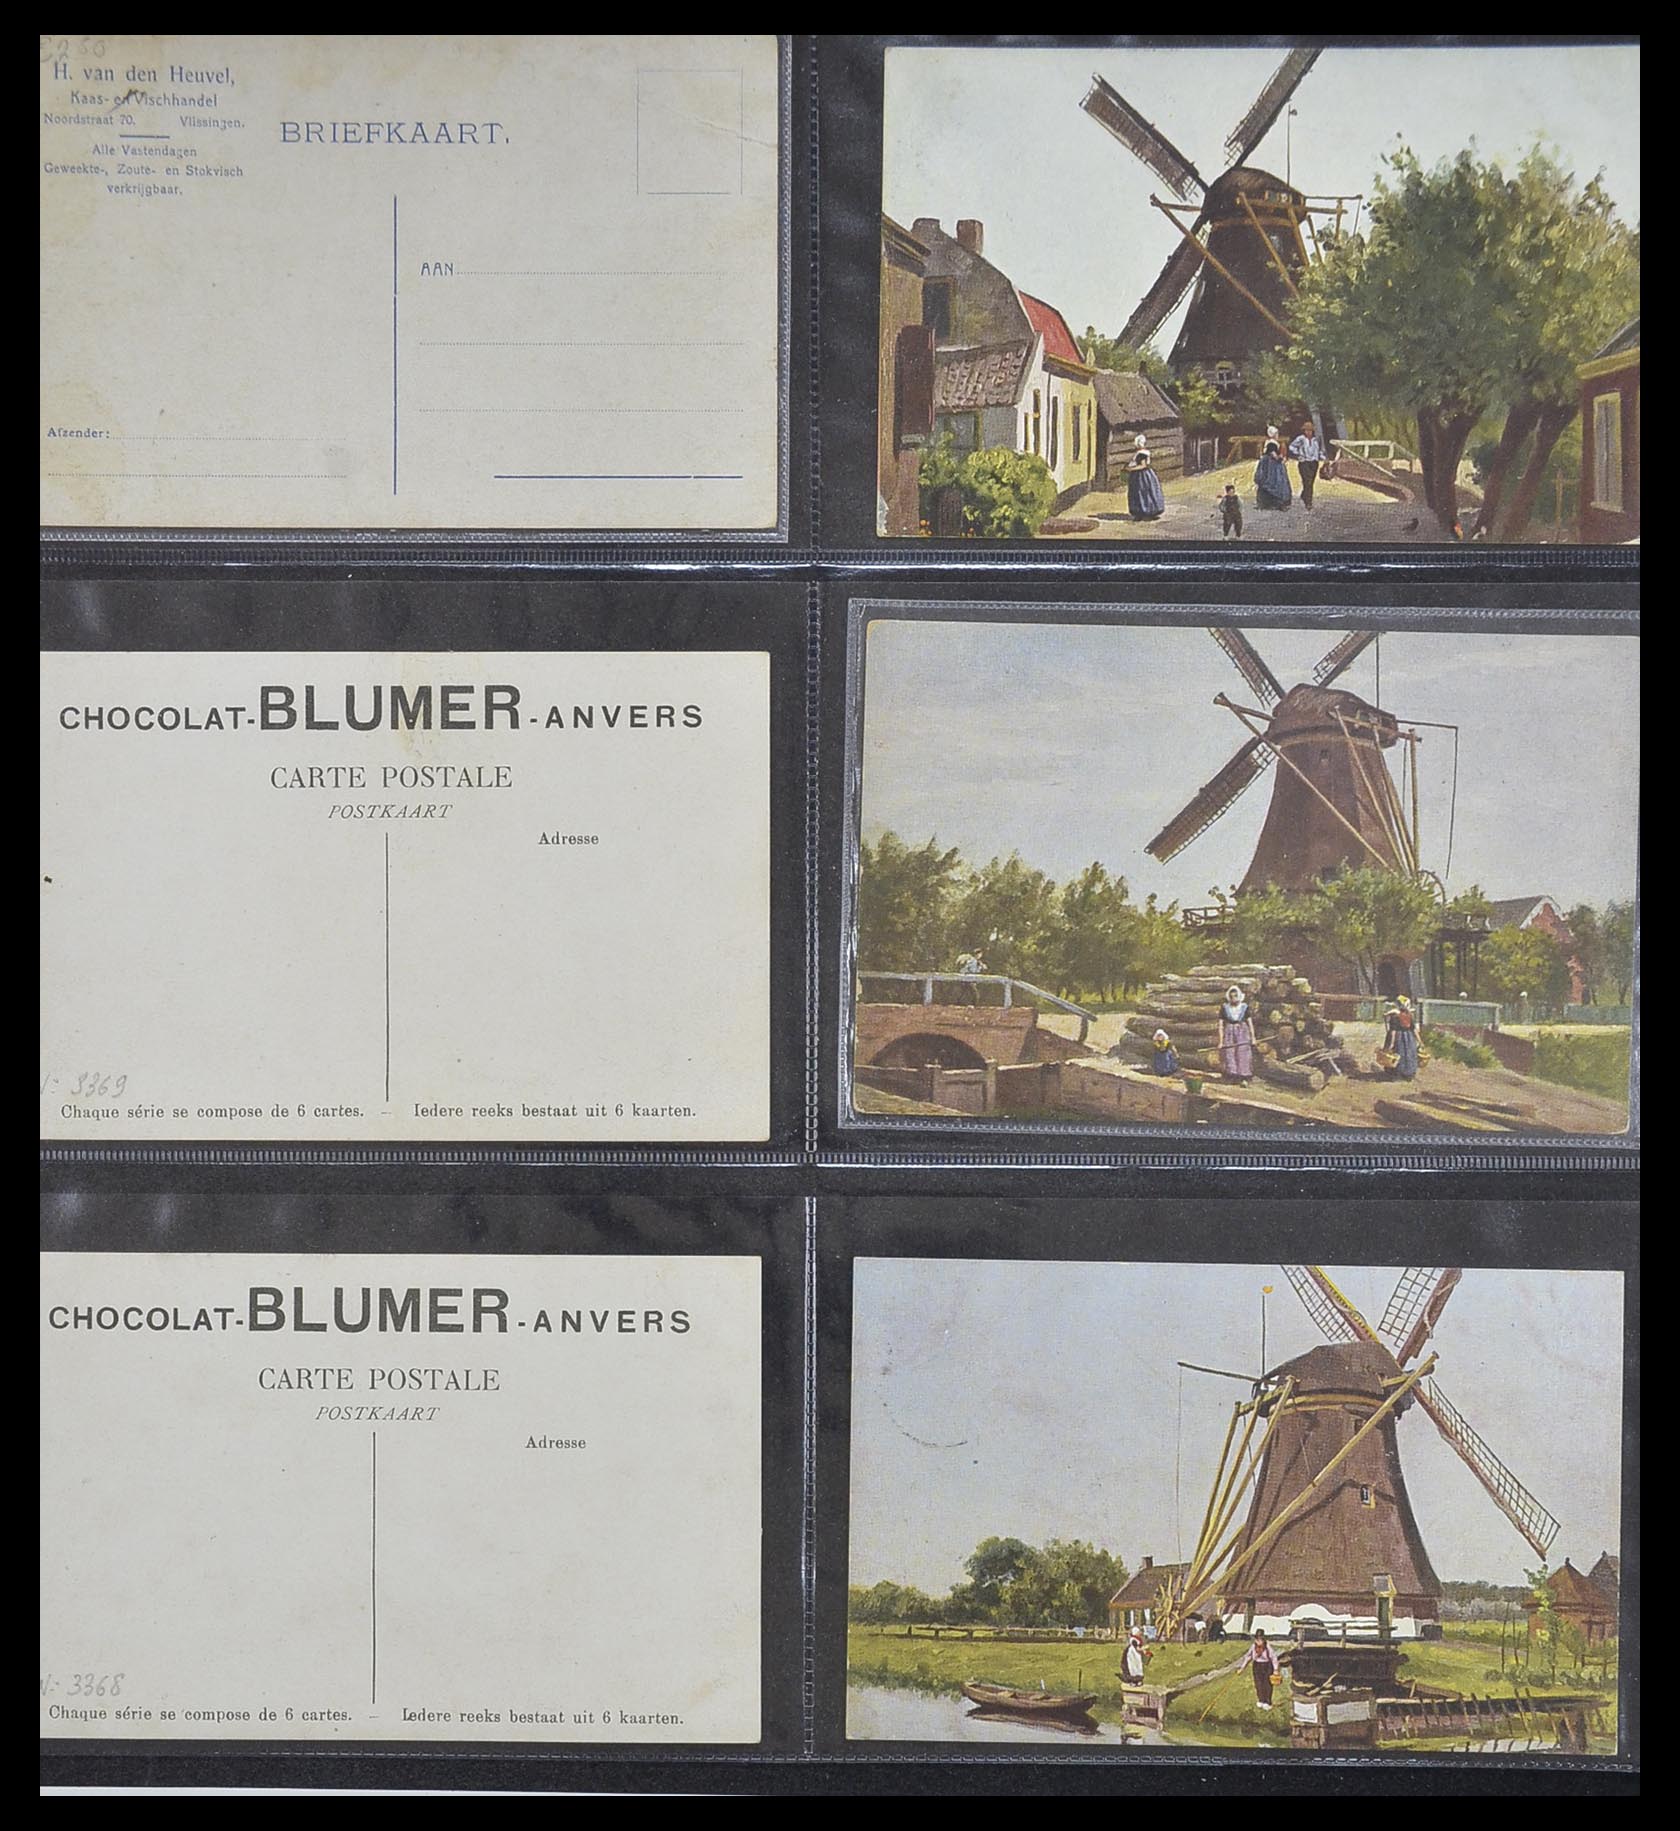 33928 181 - Stamp collection 33928 Netherlands picture postcards 1910-1930.